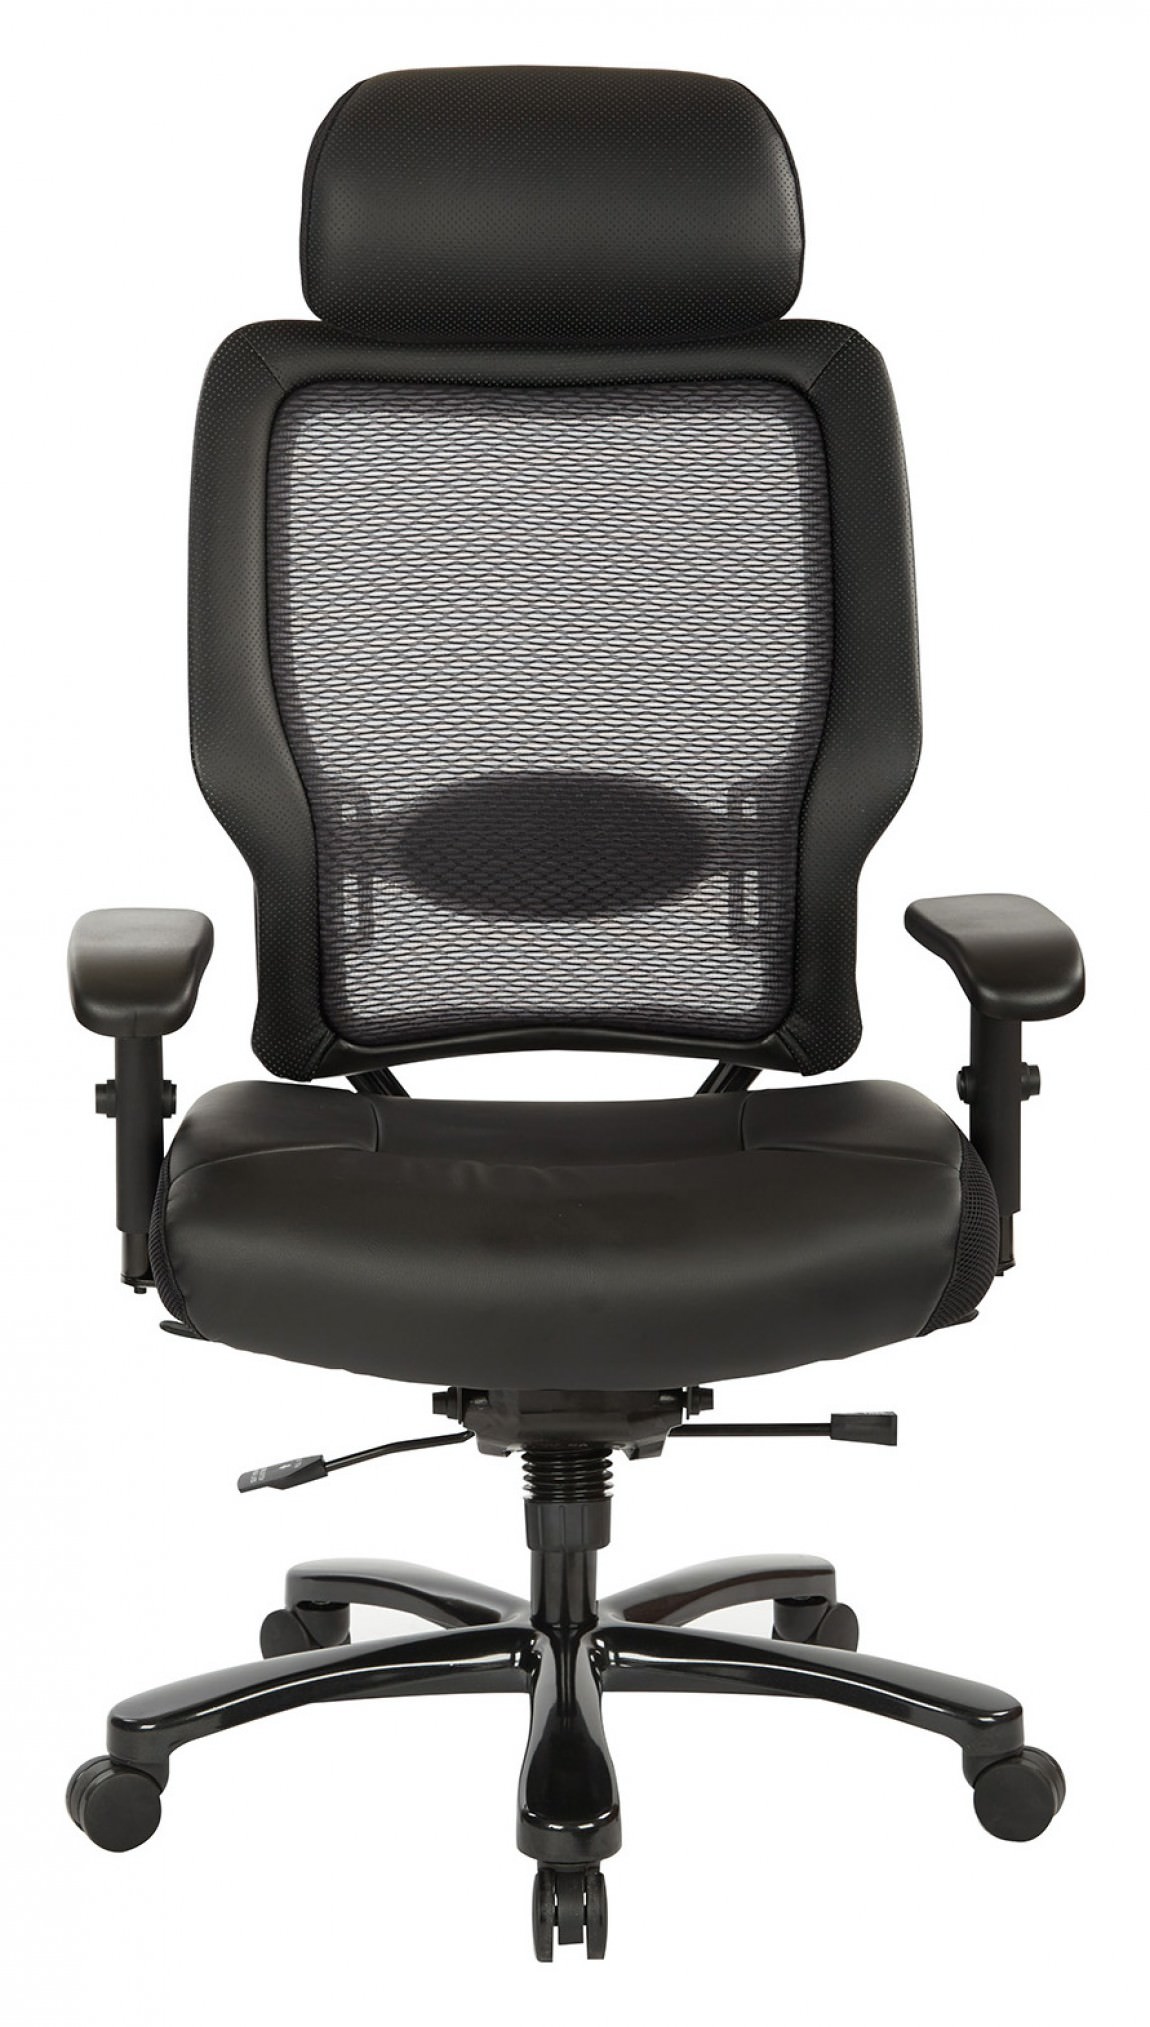 Space Seating® 26.63-in x 21.75-in Black Ergonomic Office Chair 75-37A773